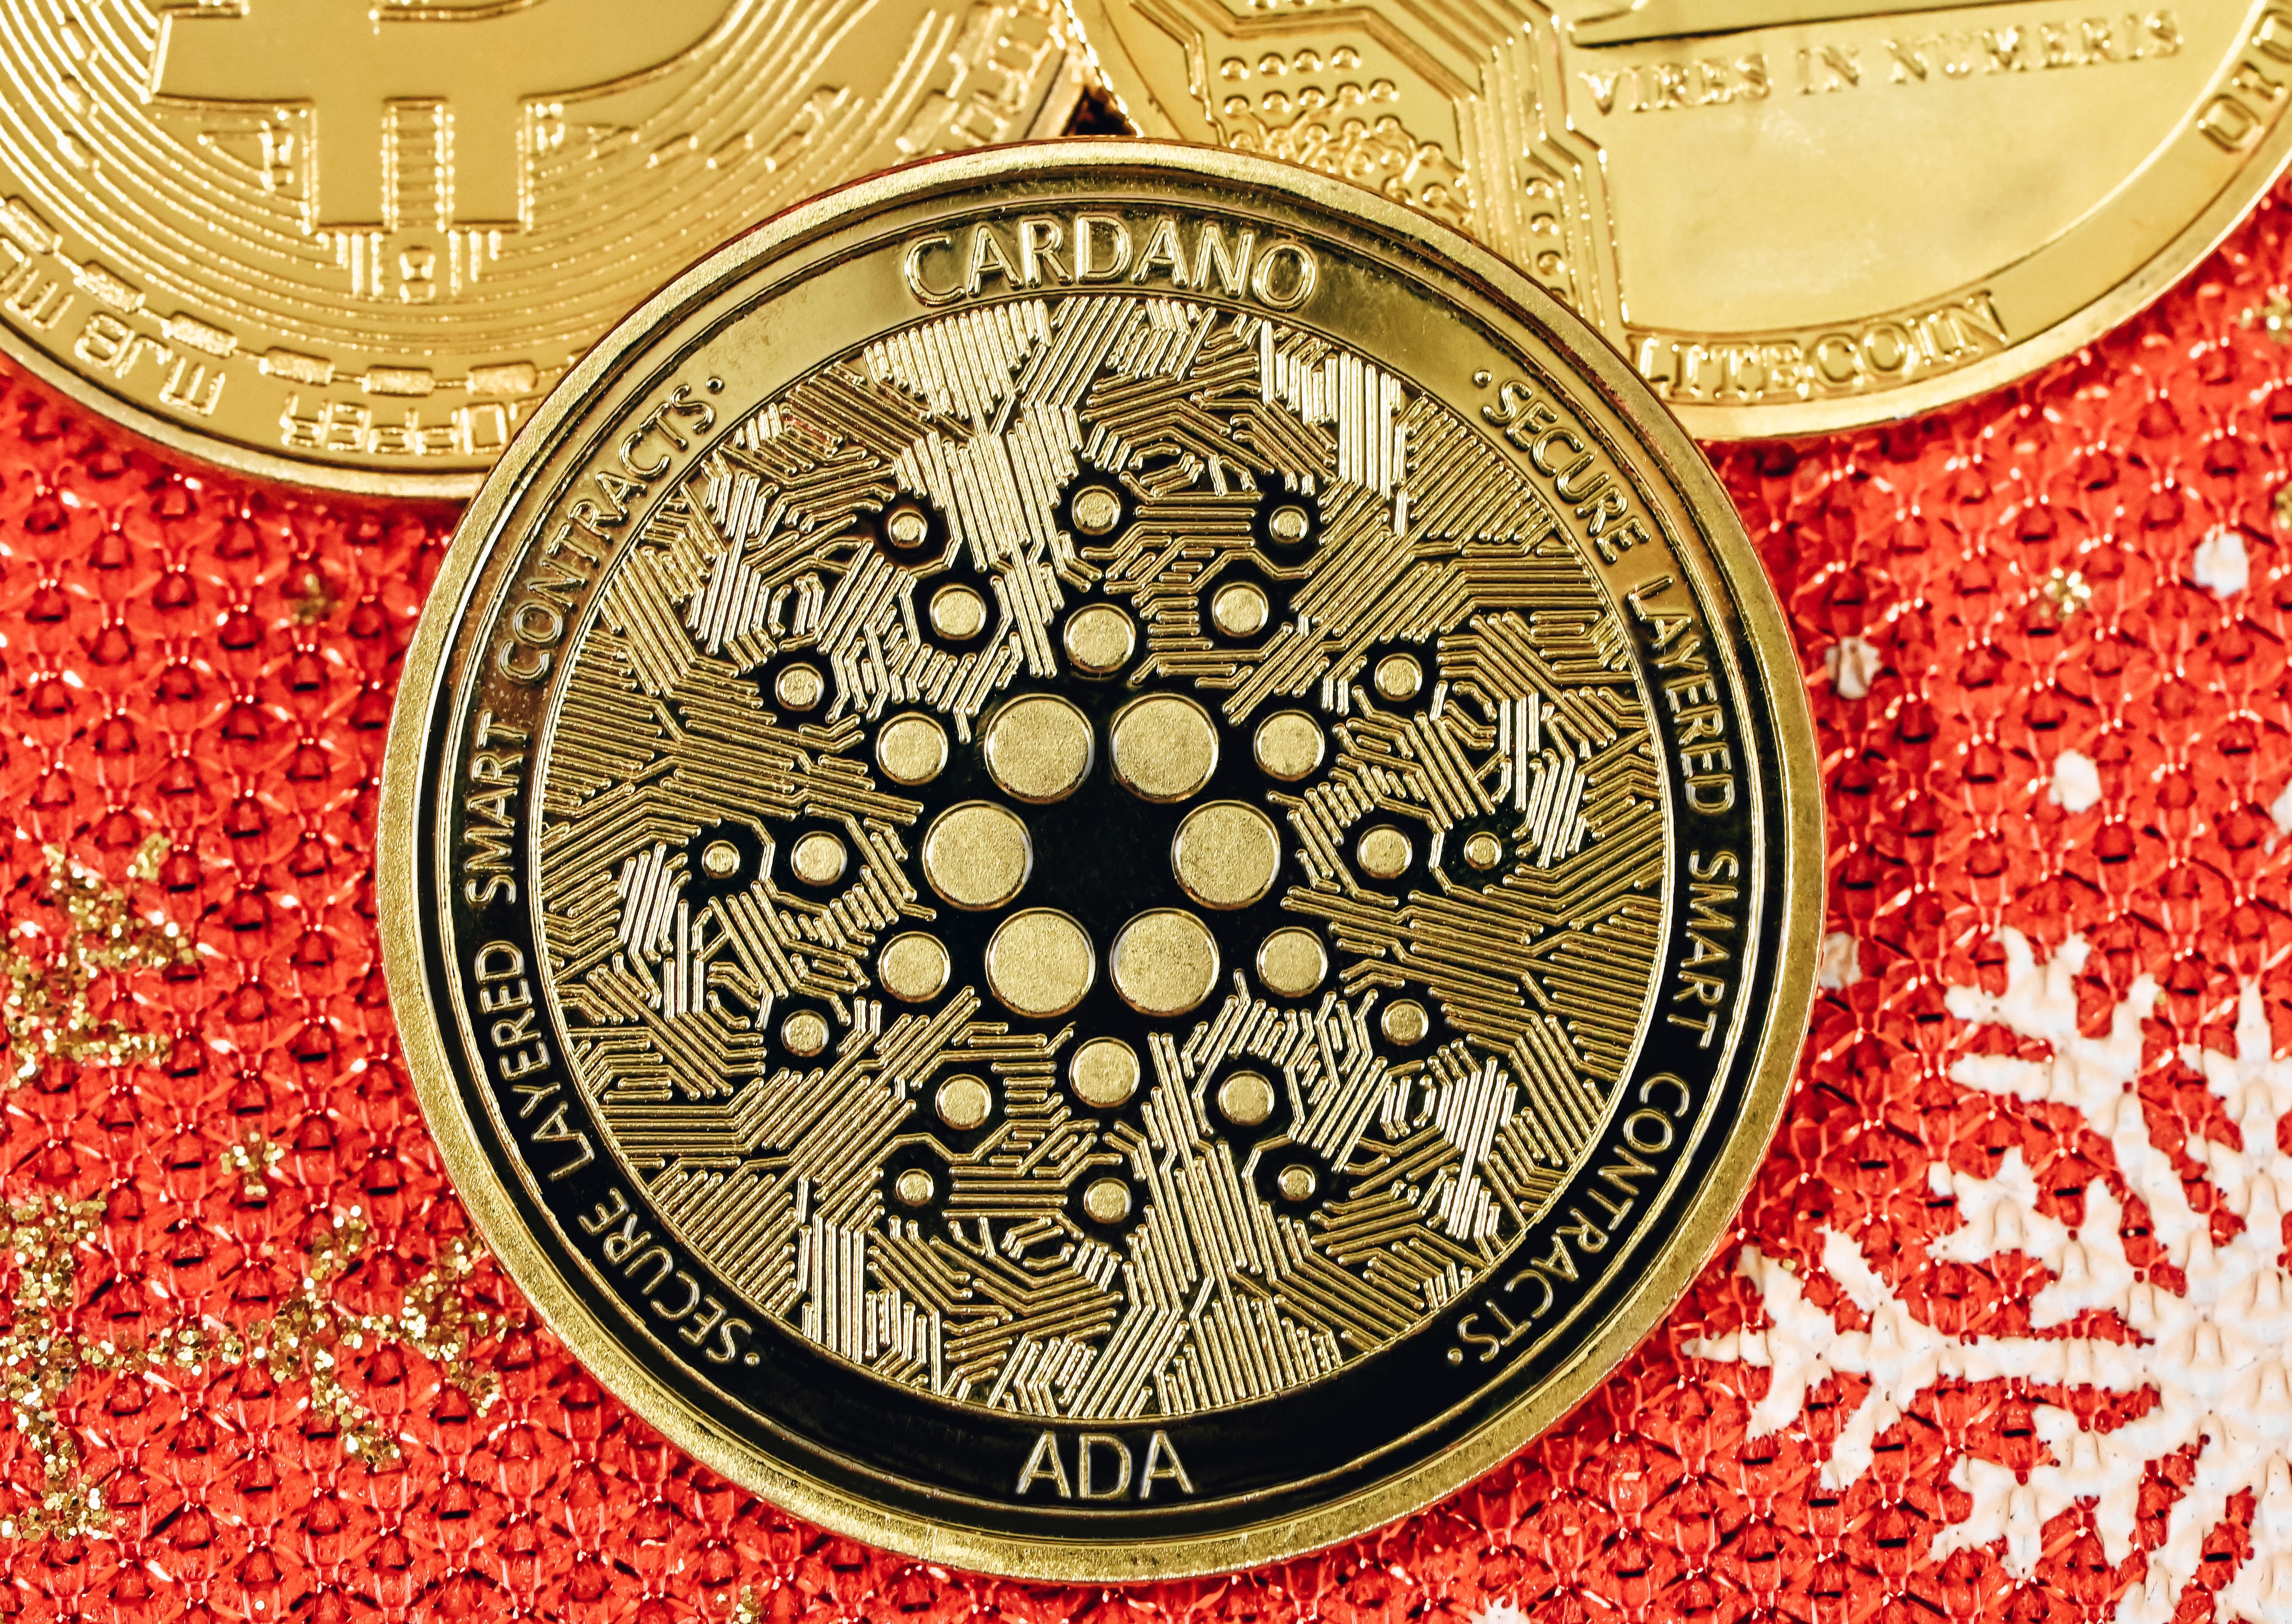 Cardano Crypto Price Prediction – ADA Gives Up Gains but Vasil Can Spur Return to $0.52